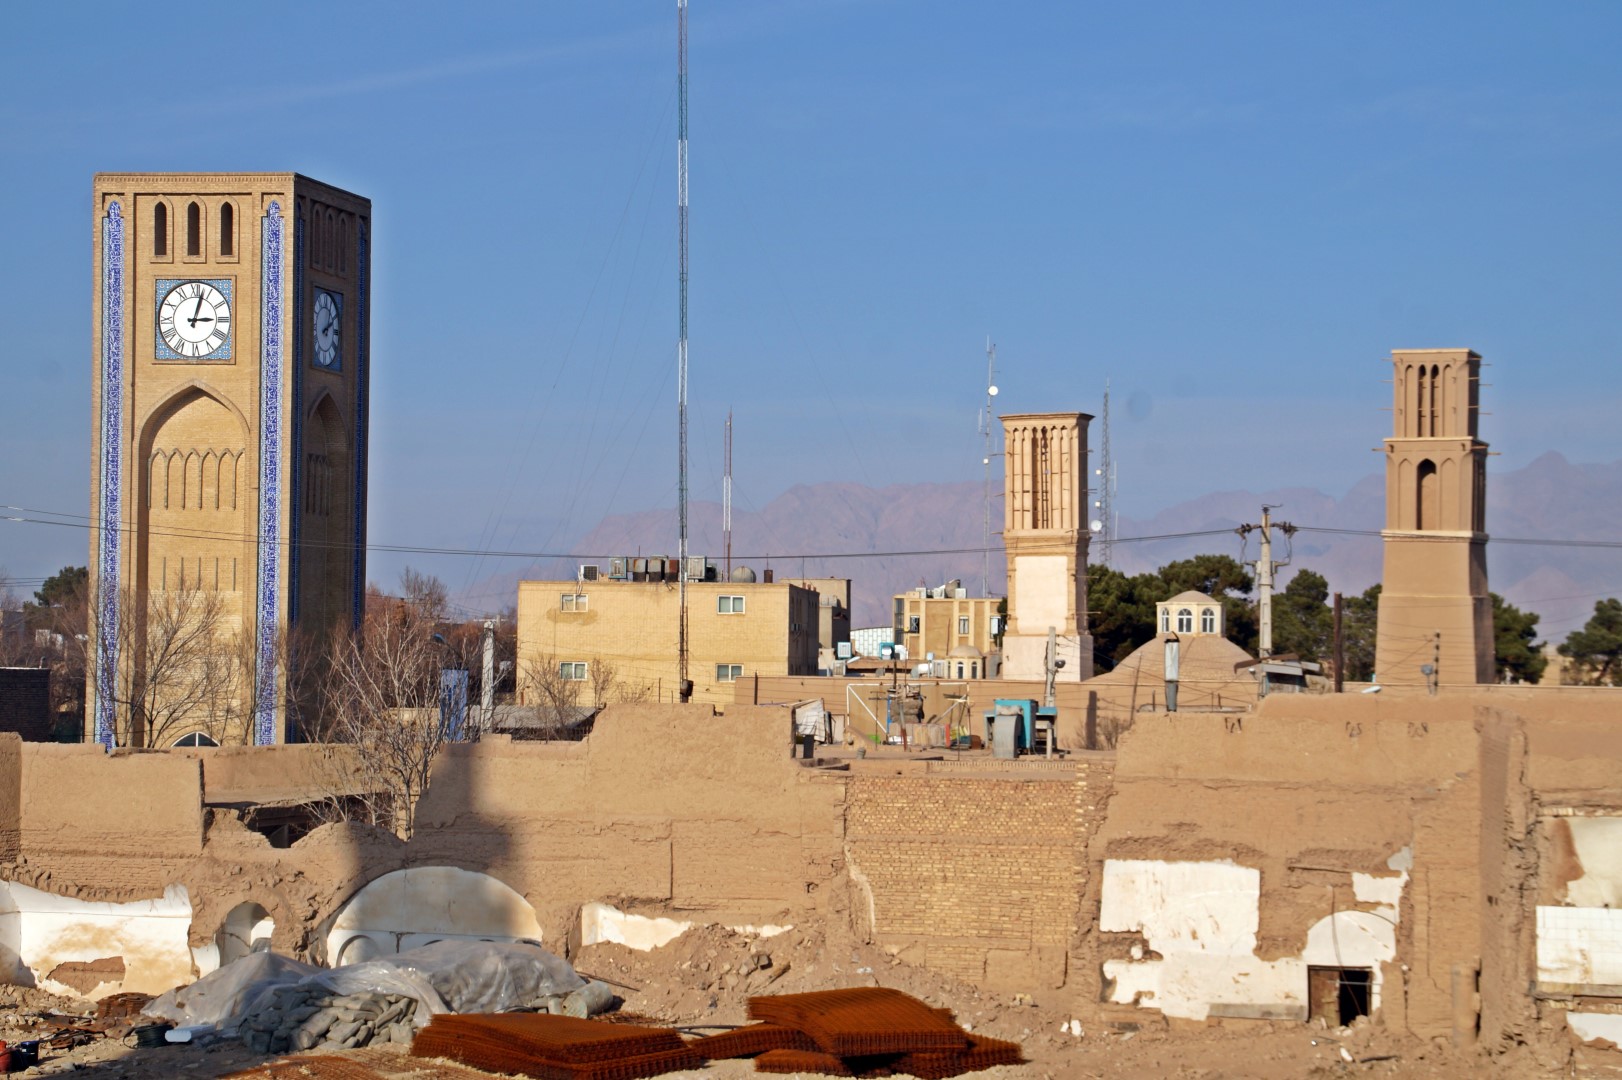 The Market Square Clock in the center of Yazd